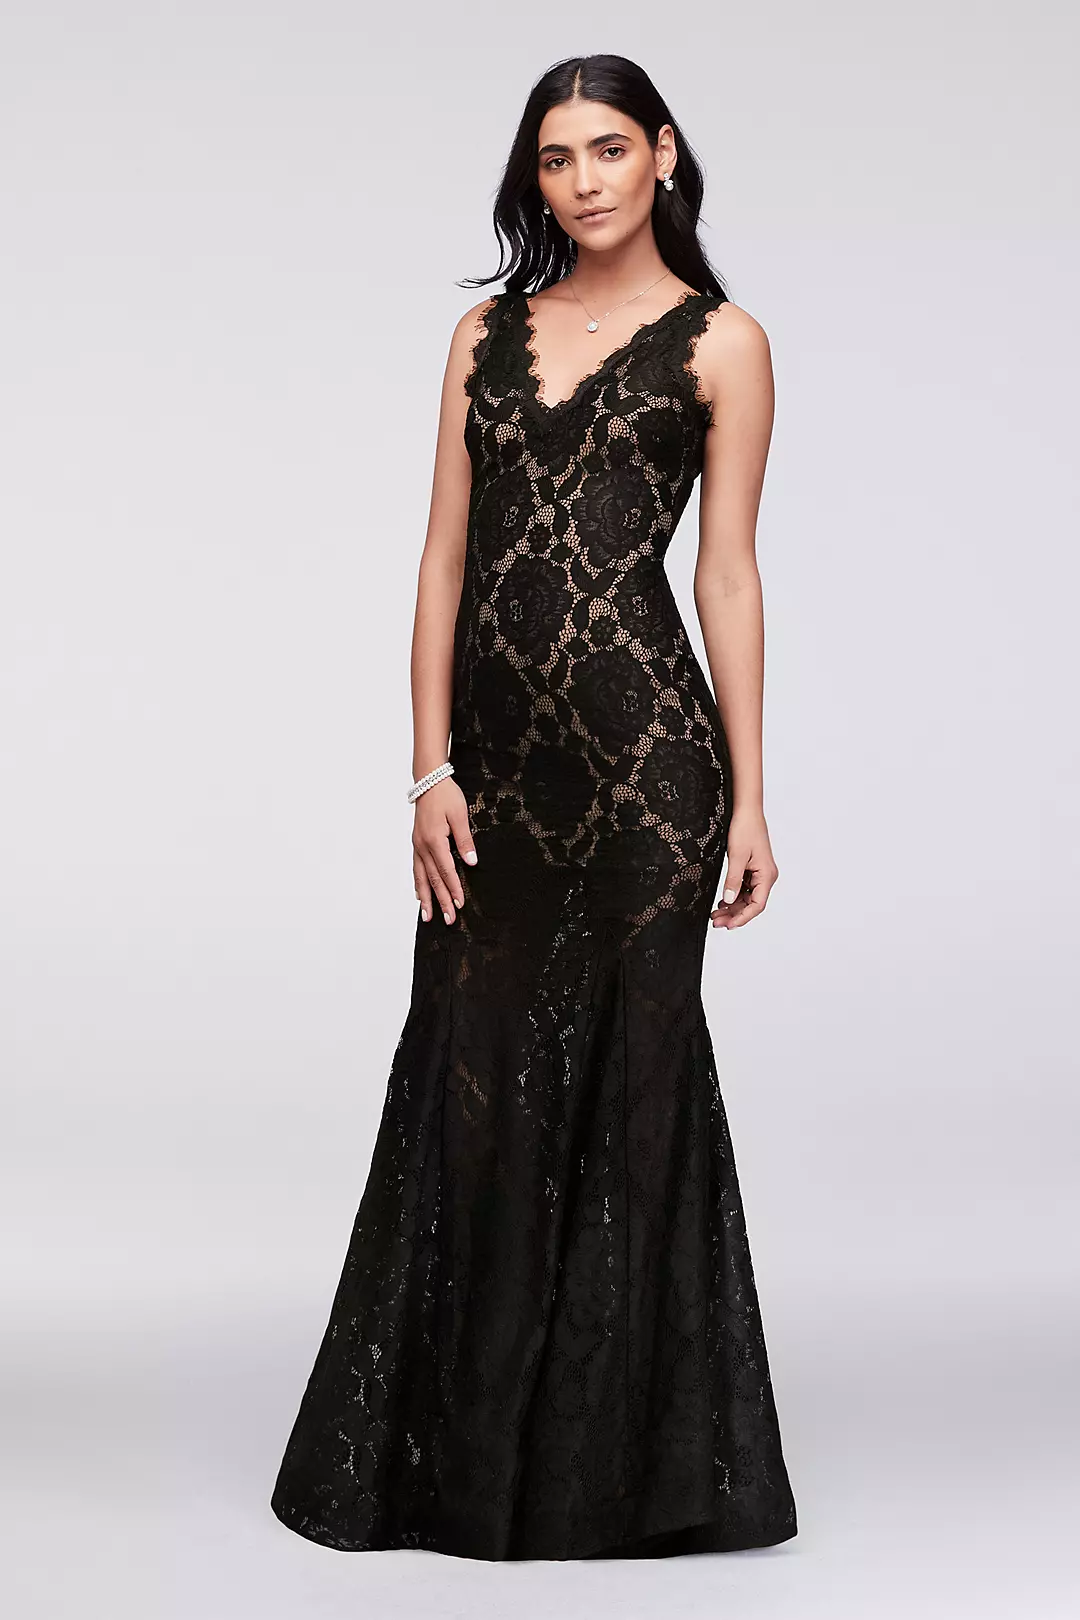 V-Neck Floral Lace Mermaid Gown with Eyelash Trim Image